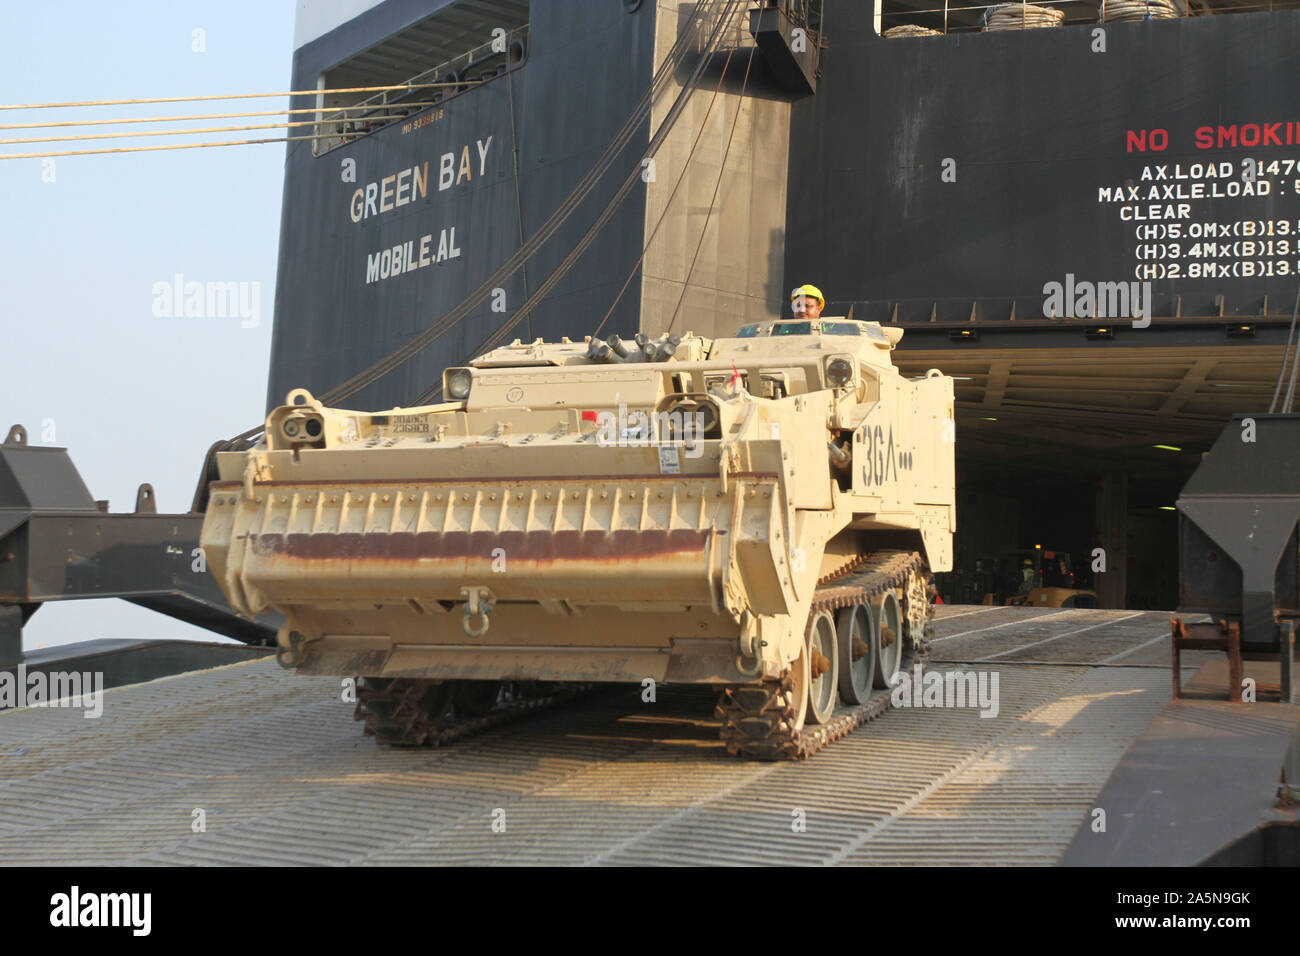 An other country another port worker drives an M9 Armored Combat Earthmover off of the Green Bay vessel at Shuaiba Port, Kuwait, Oct. 20, 2019. 1188th Deployment and Distribution Support Battalion (DDSB) Soldiers and other country national port workers conducted 24-hours of continuous operations to offload this, and other equipment belonging to the 30th Armored Brigade Combat Team (ABCT), from the vessel. The 30th ABCT will replace the 3rd ABCT, 4th Infantry Division and assume the Task Force Spartan mission in the coming weeks. (U.S. Army Reserve photo by Spc. Dakota Vanidestine) Stock Photo